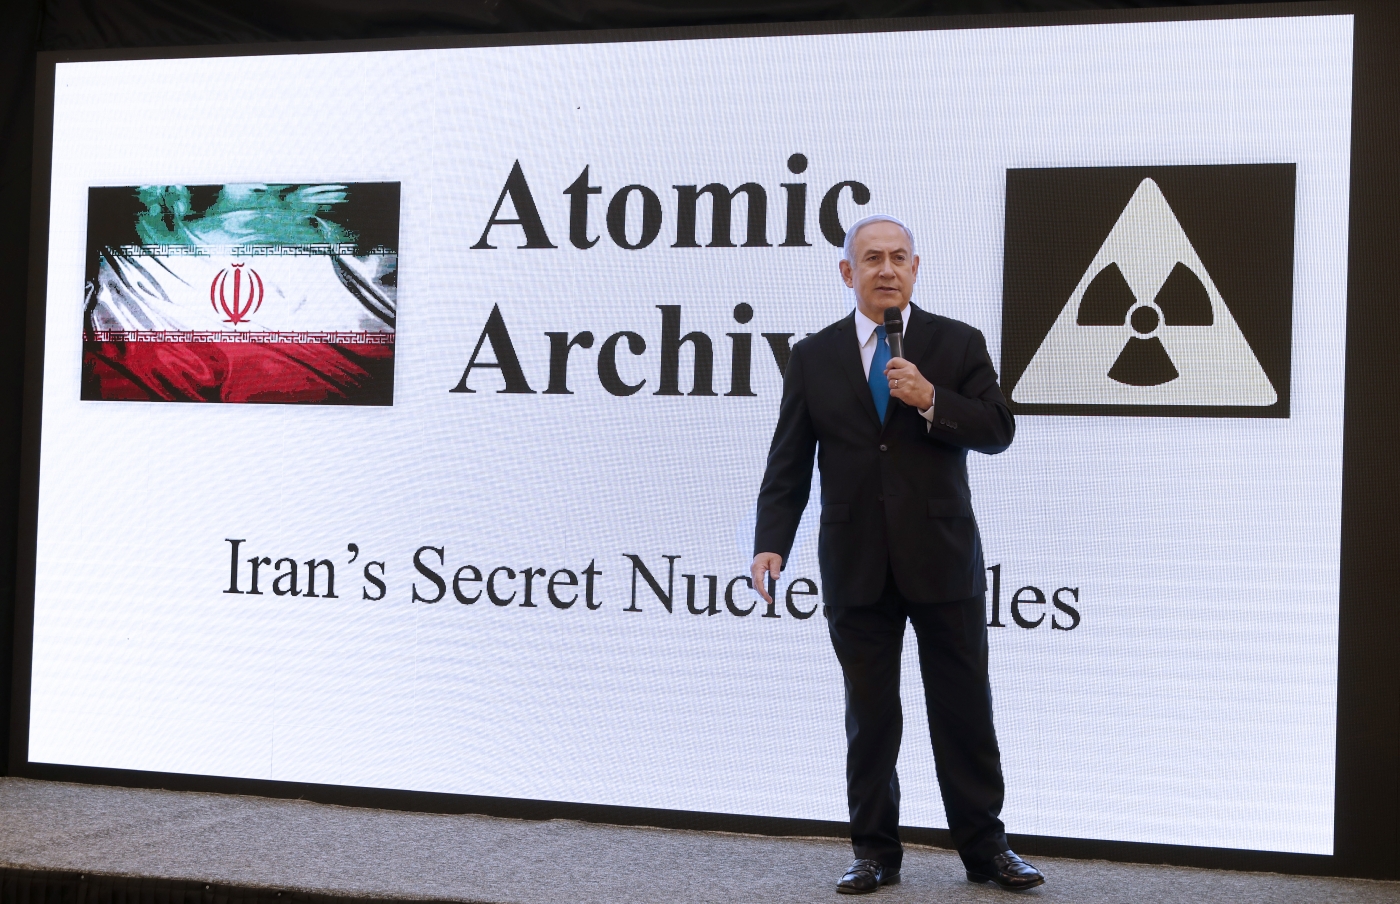 Netanyahu has opposed the Iran nuclear deal since before its implementation